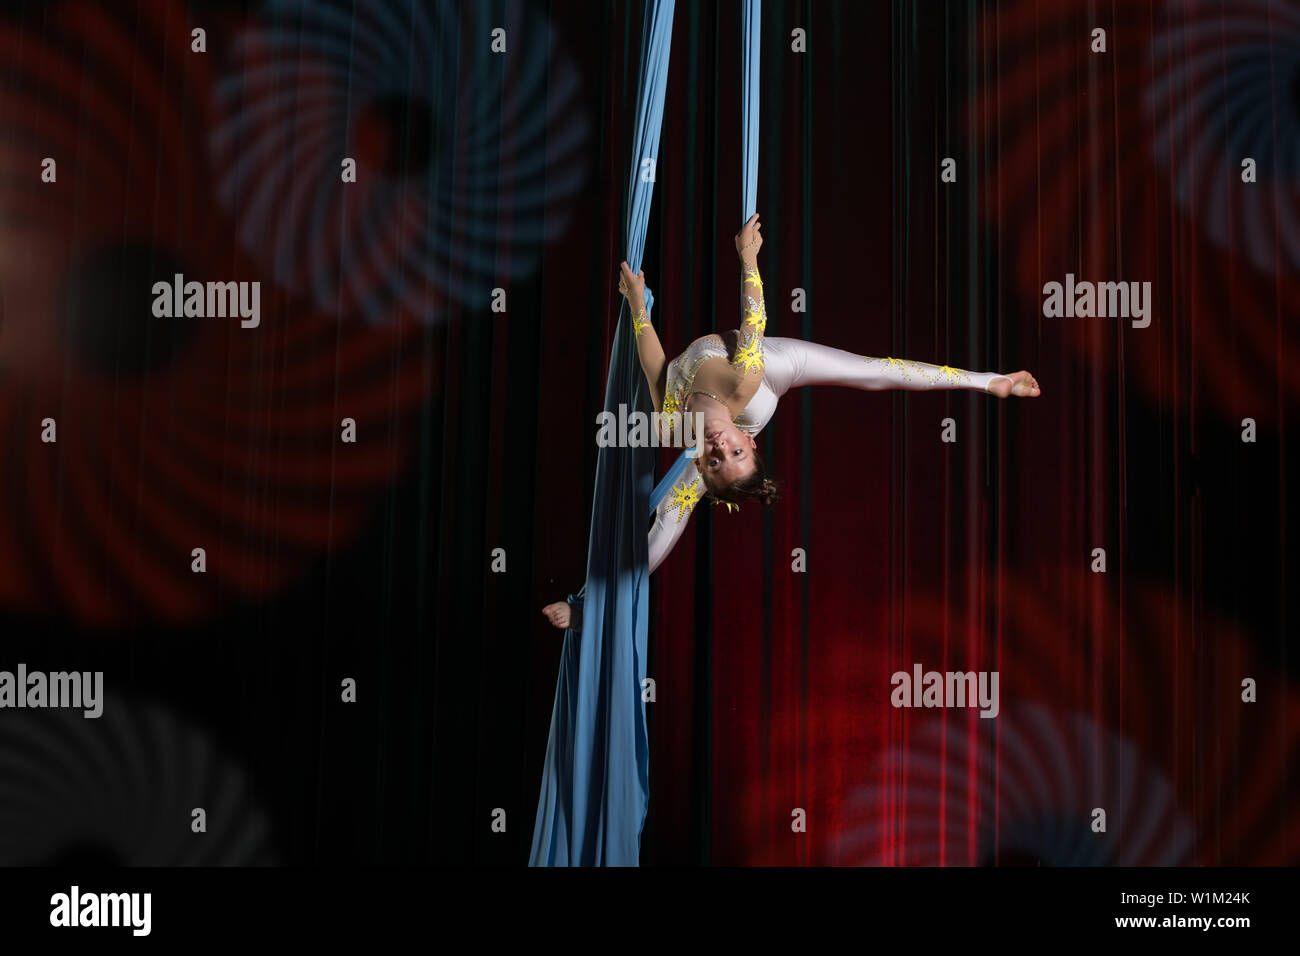 Circus artist acrobat performance on canvases. The girl perform acrobatic elements in the air. Stock Photo